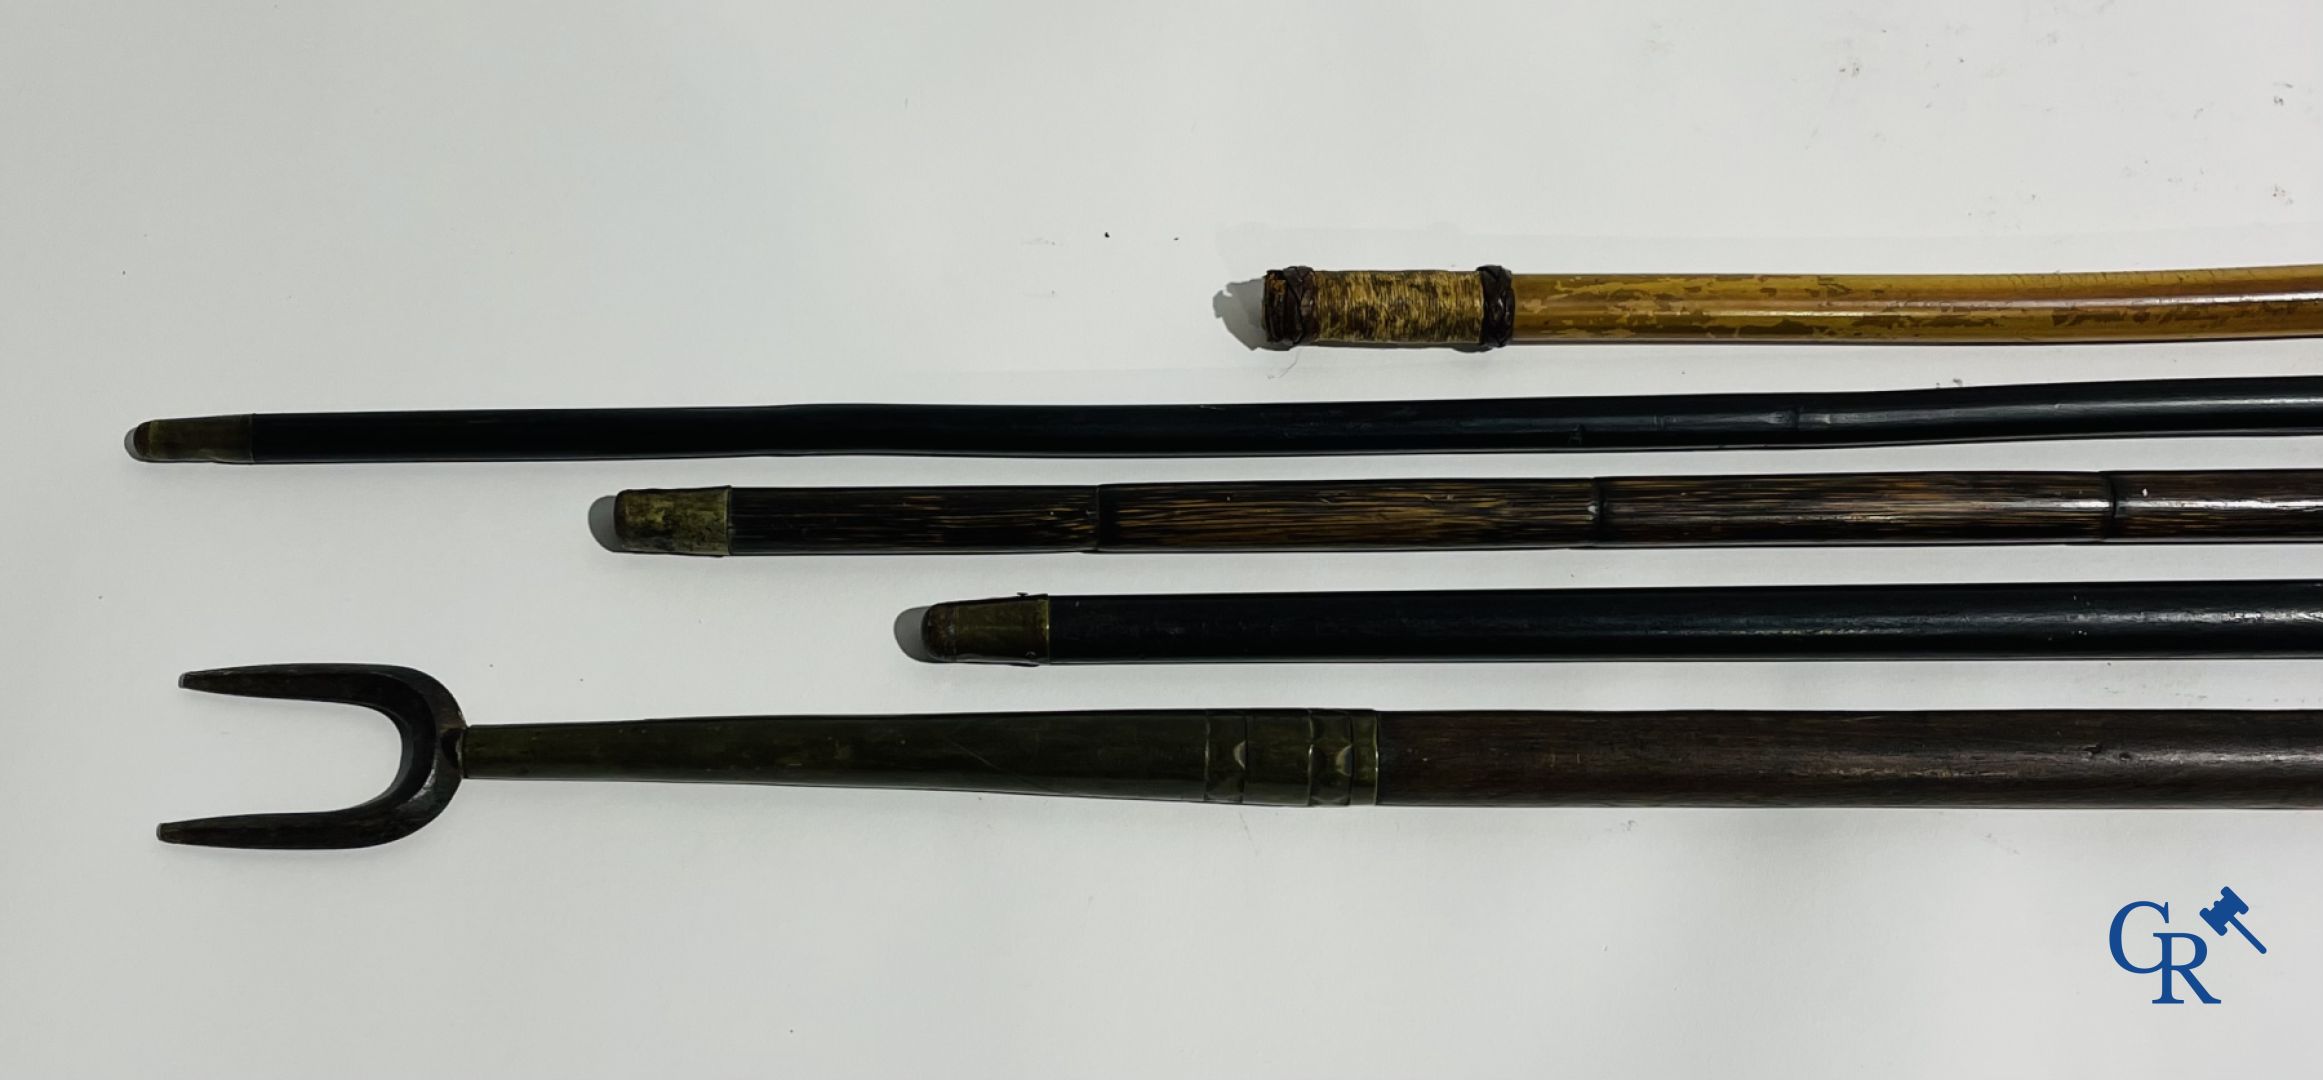 5 walking sticks including 1 with silver handle. - Image 3 of 4